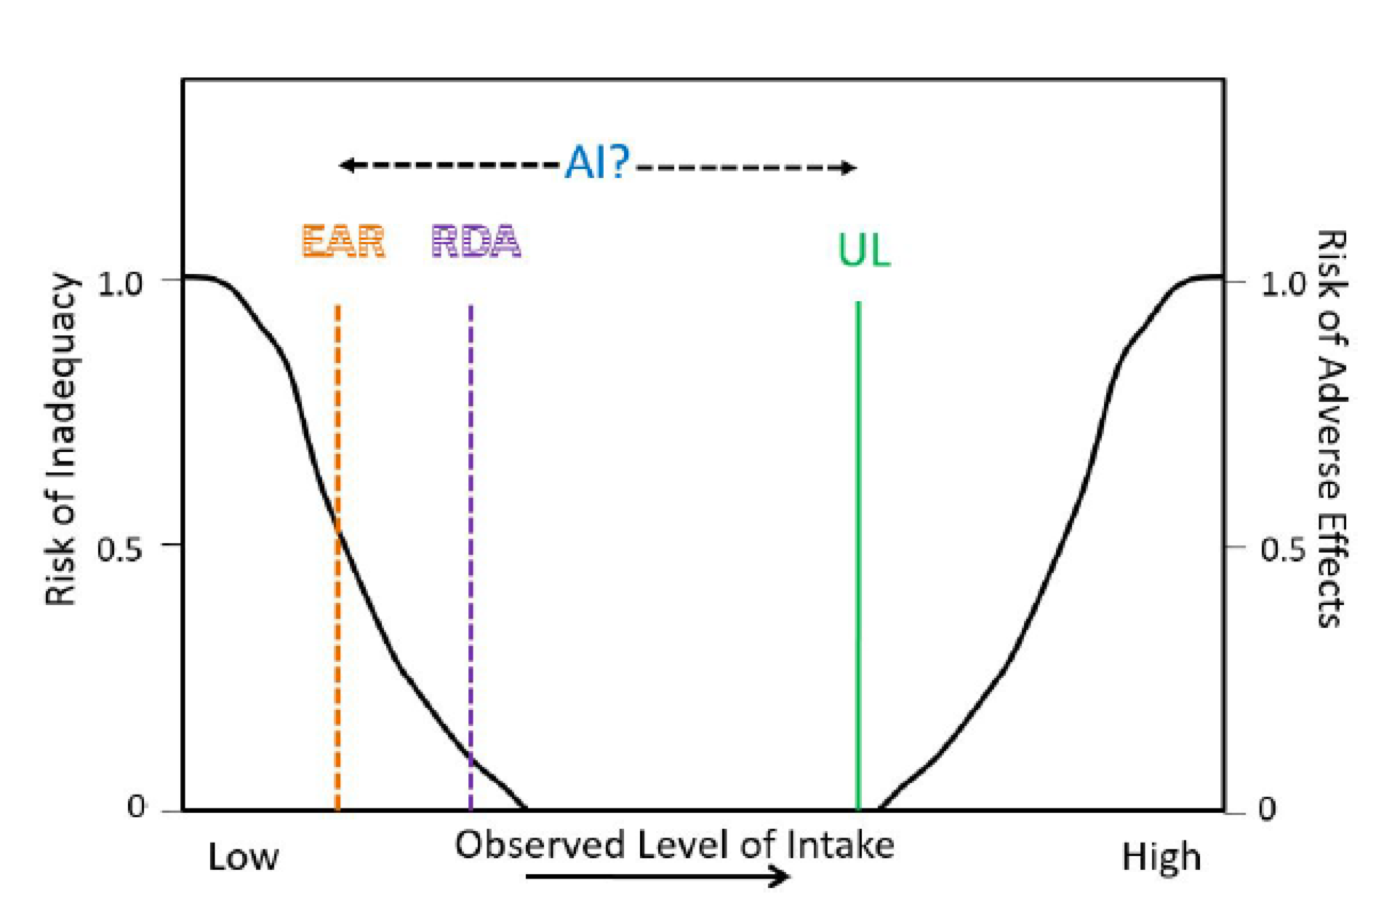 The image is a line graph, with "observed level of intake" on the x-axis; "risk of inadequacy" on the left-hand y-axis; and "risk of adverse effects" on the right-hand y-axis. The graphed line is U-shaped, showing an increased risk of inadequacy at low levels of nutrient intake on the left side of the graph and increased risk of adverse effects at high levels of nutrient intake on the right side of the graph. Moving from left to right, lines are drawn representing the EAR (halfway on the slope of the left side of the U); RDA (at the base of the slope on the left side of the U); and UL (at the base of the slope on the right side of the U). The AI is shown as a range between the EAR and UL.